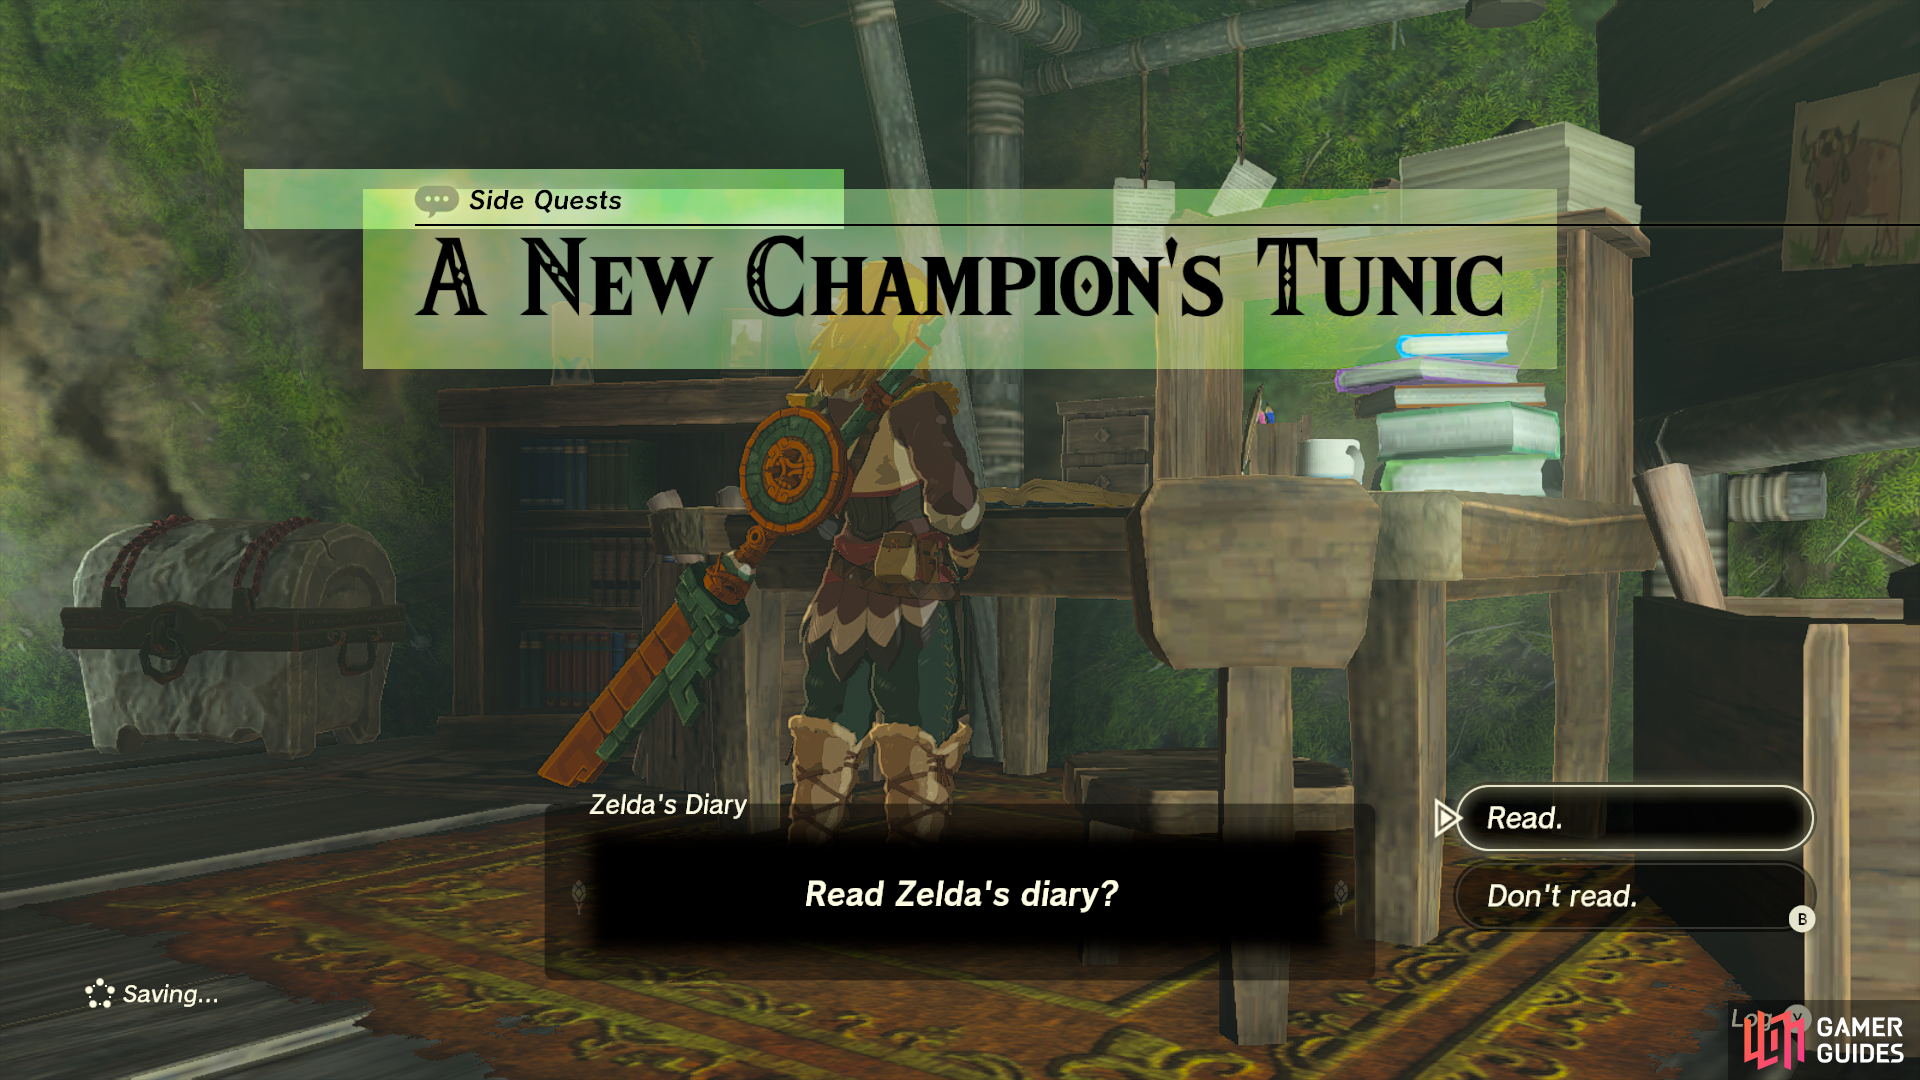 Read Zelda's diary to start the quest, A New Champion's Tunic.